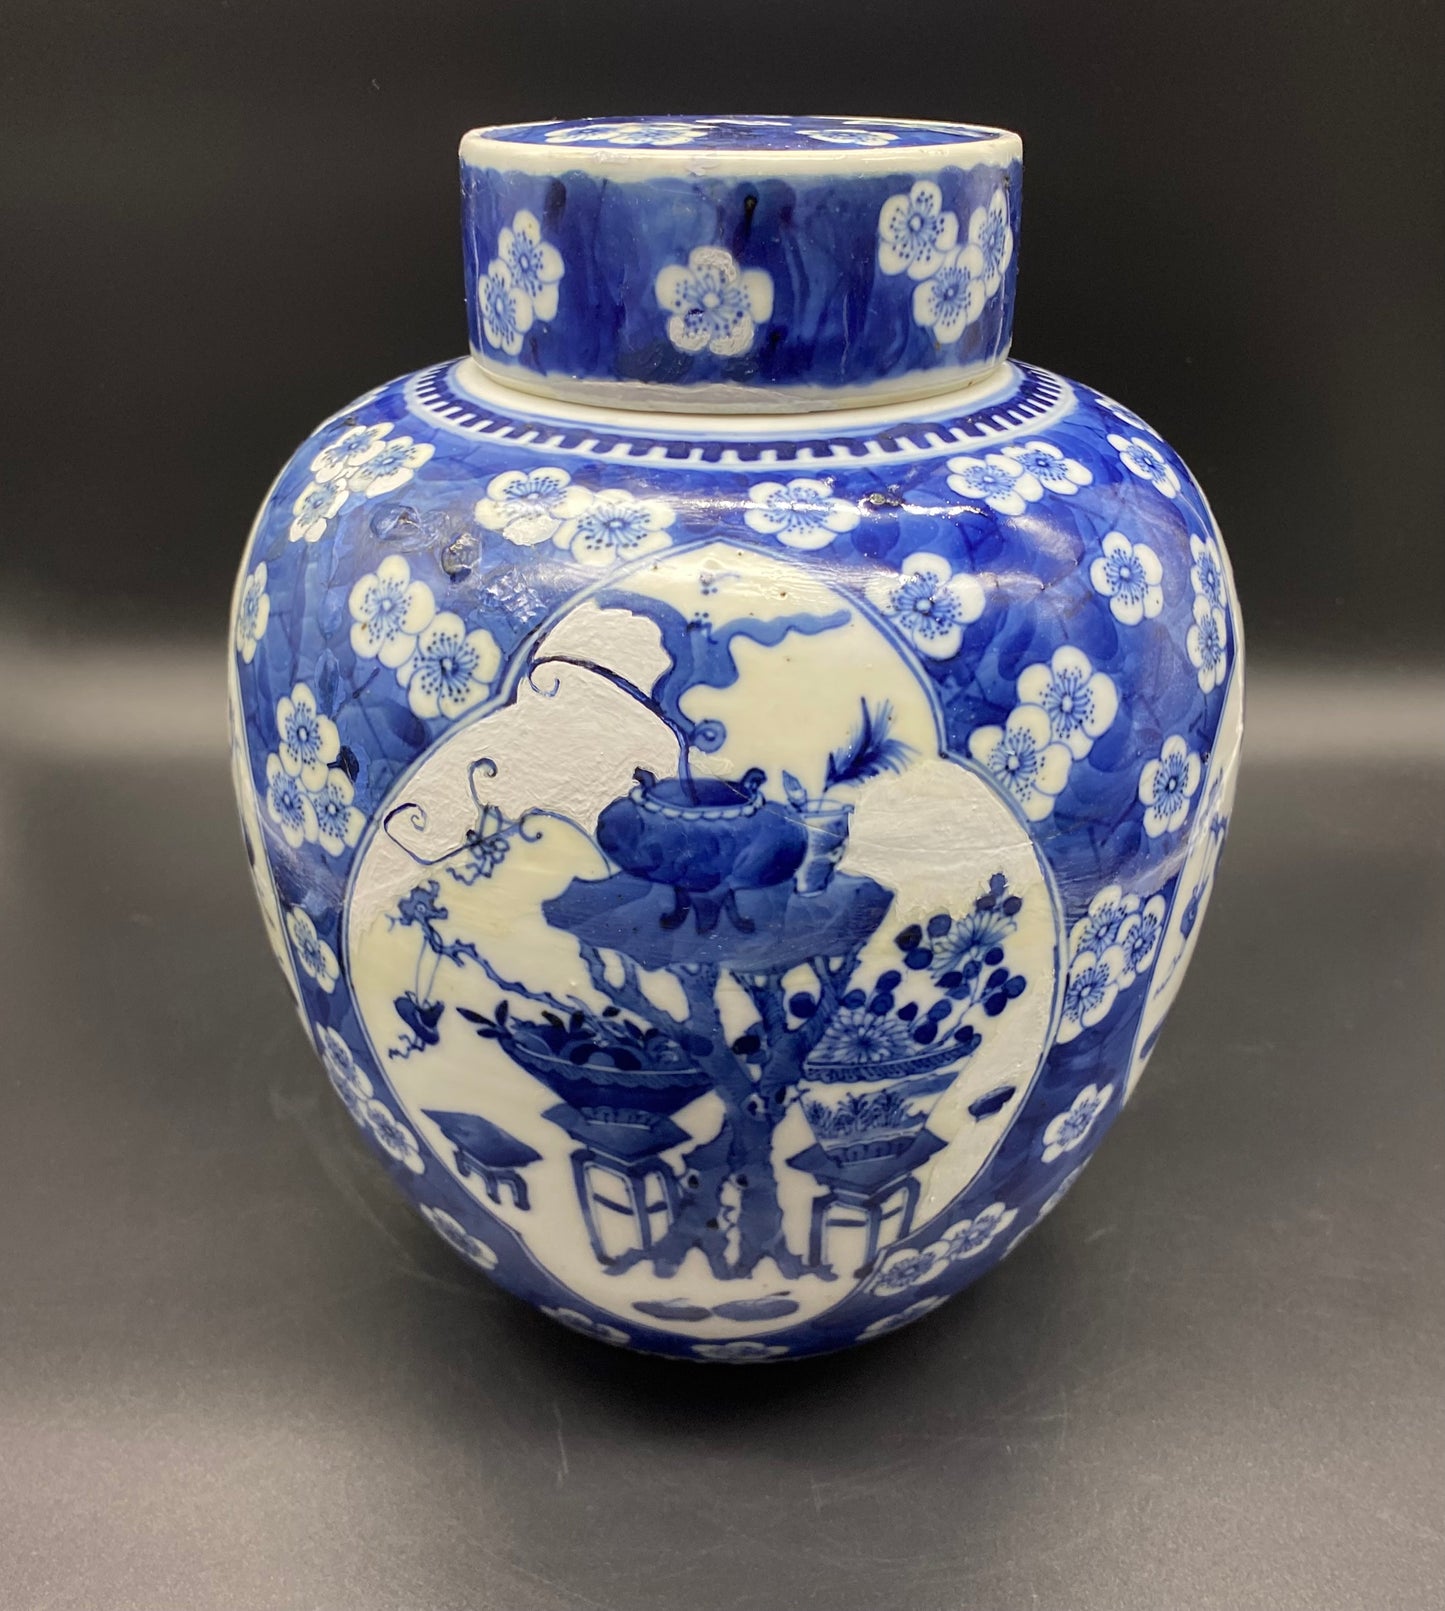 The beautiful blue color and prunus decoration make it a valuable addition to any collection. 